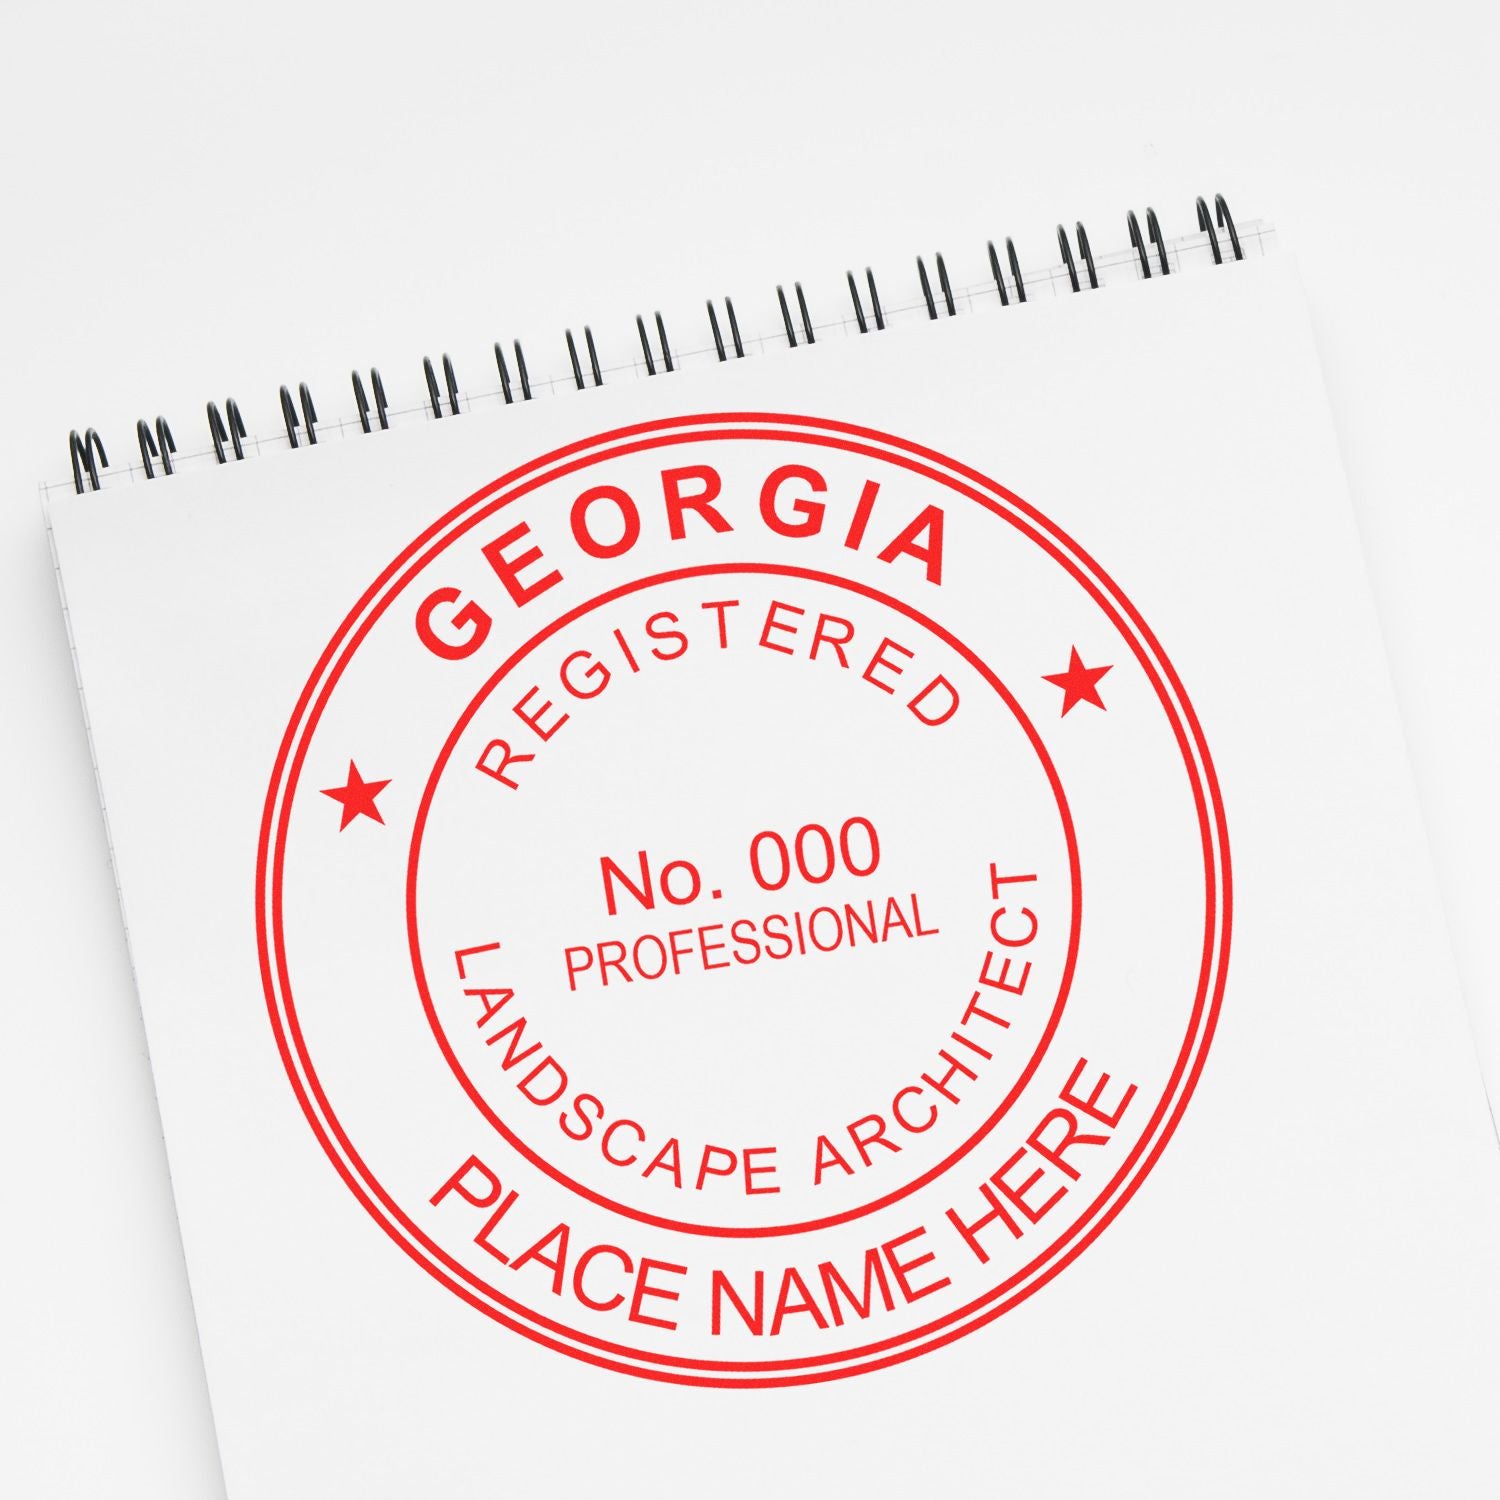 A photograph of the Digital Georgia Landscape Architect Stamp stamp impression reveals a vivid, professional image of the on paper.